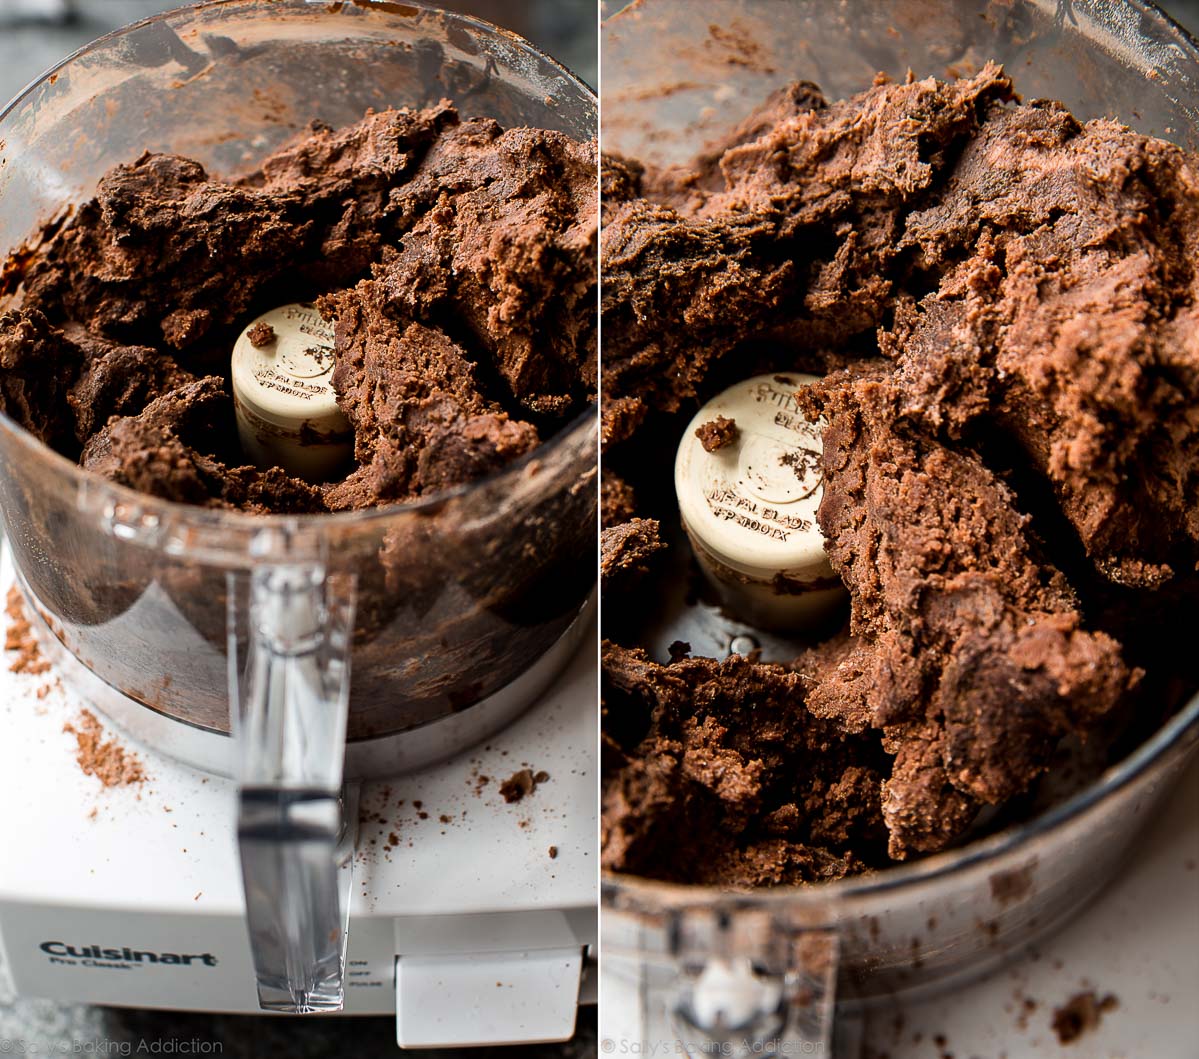 2 images of chocolate pie dough in a food processor